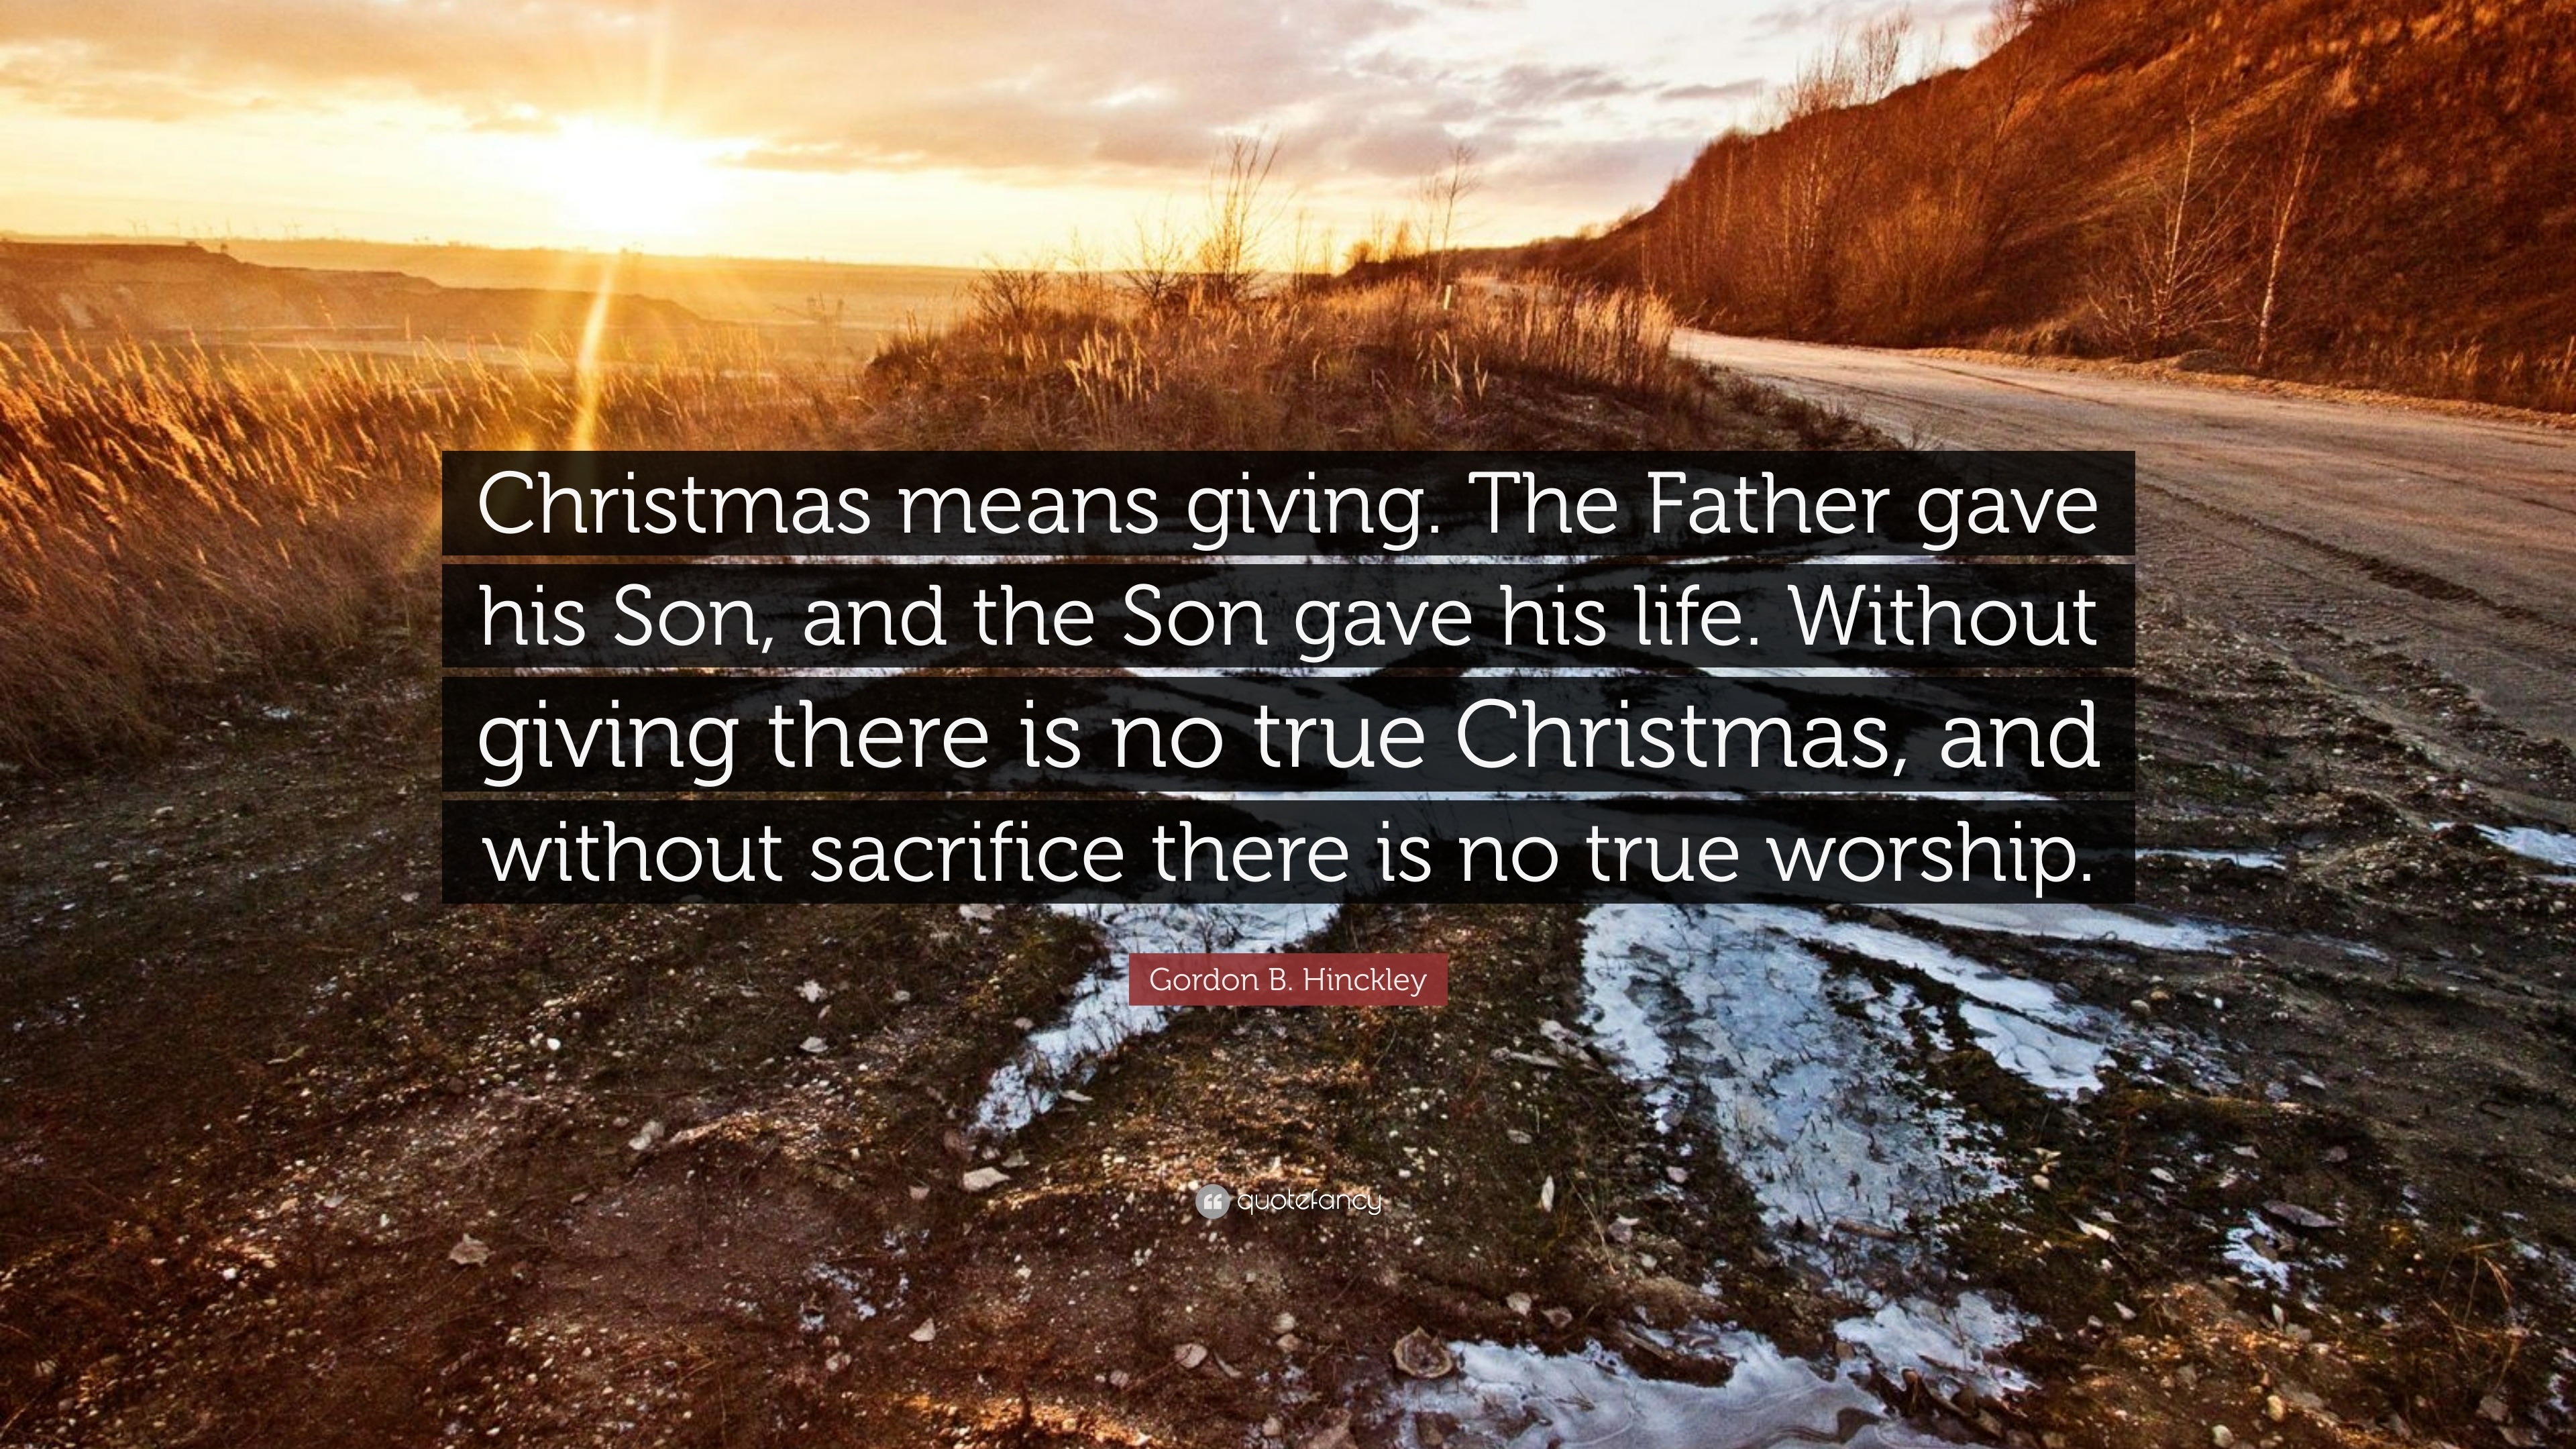 Gordon B Hinckley Quote “Christmas means giving The Father gave his Son